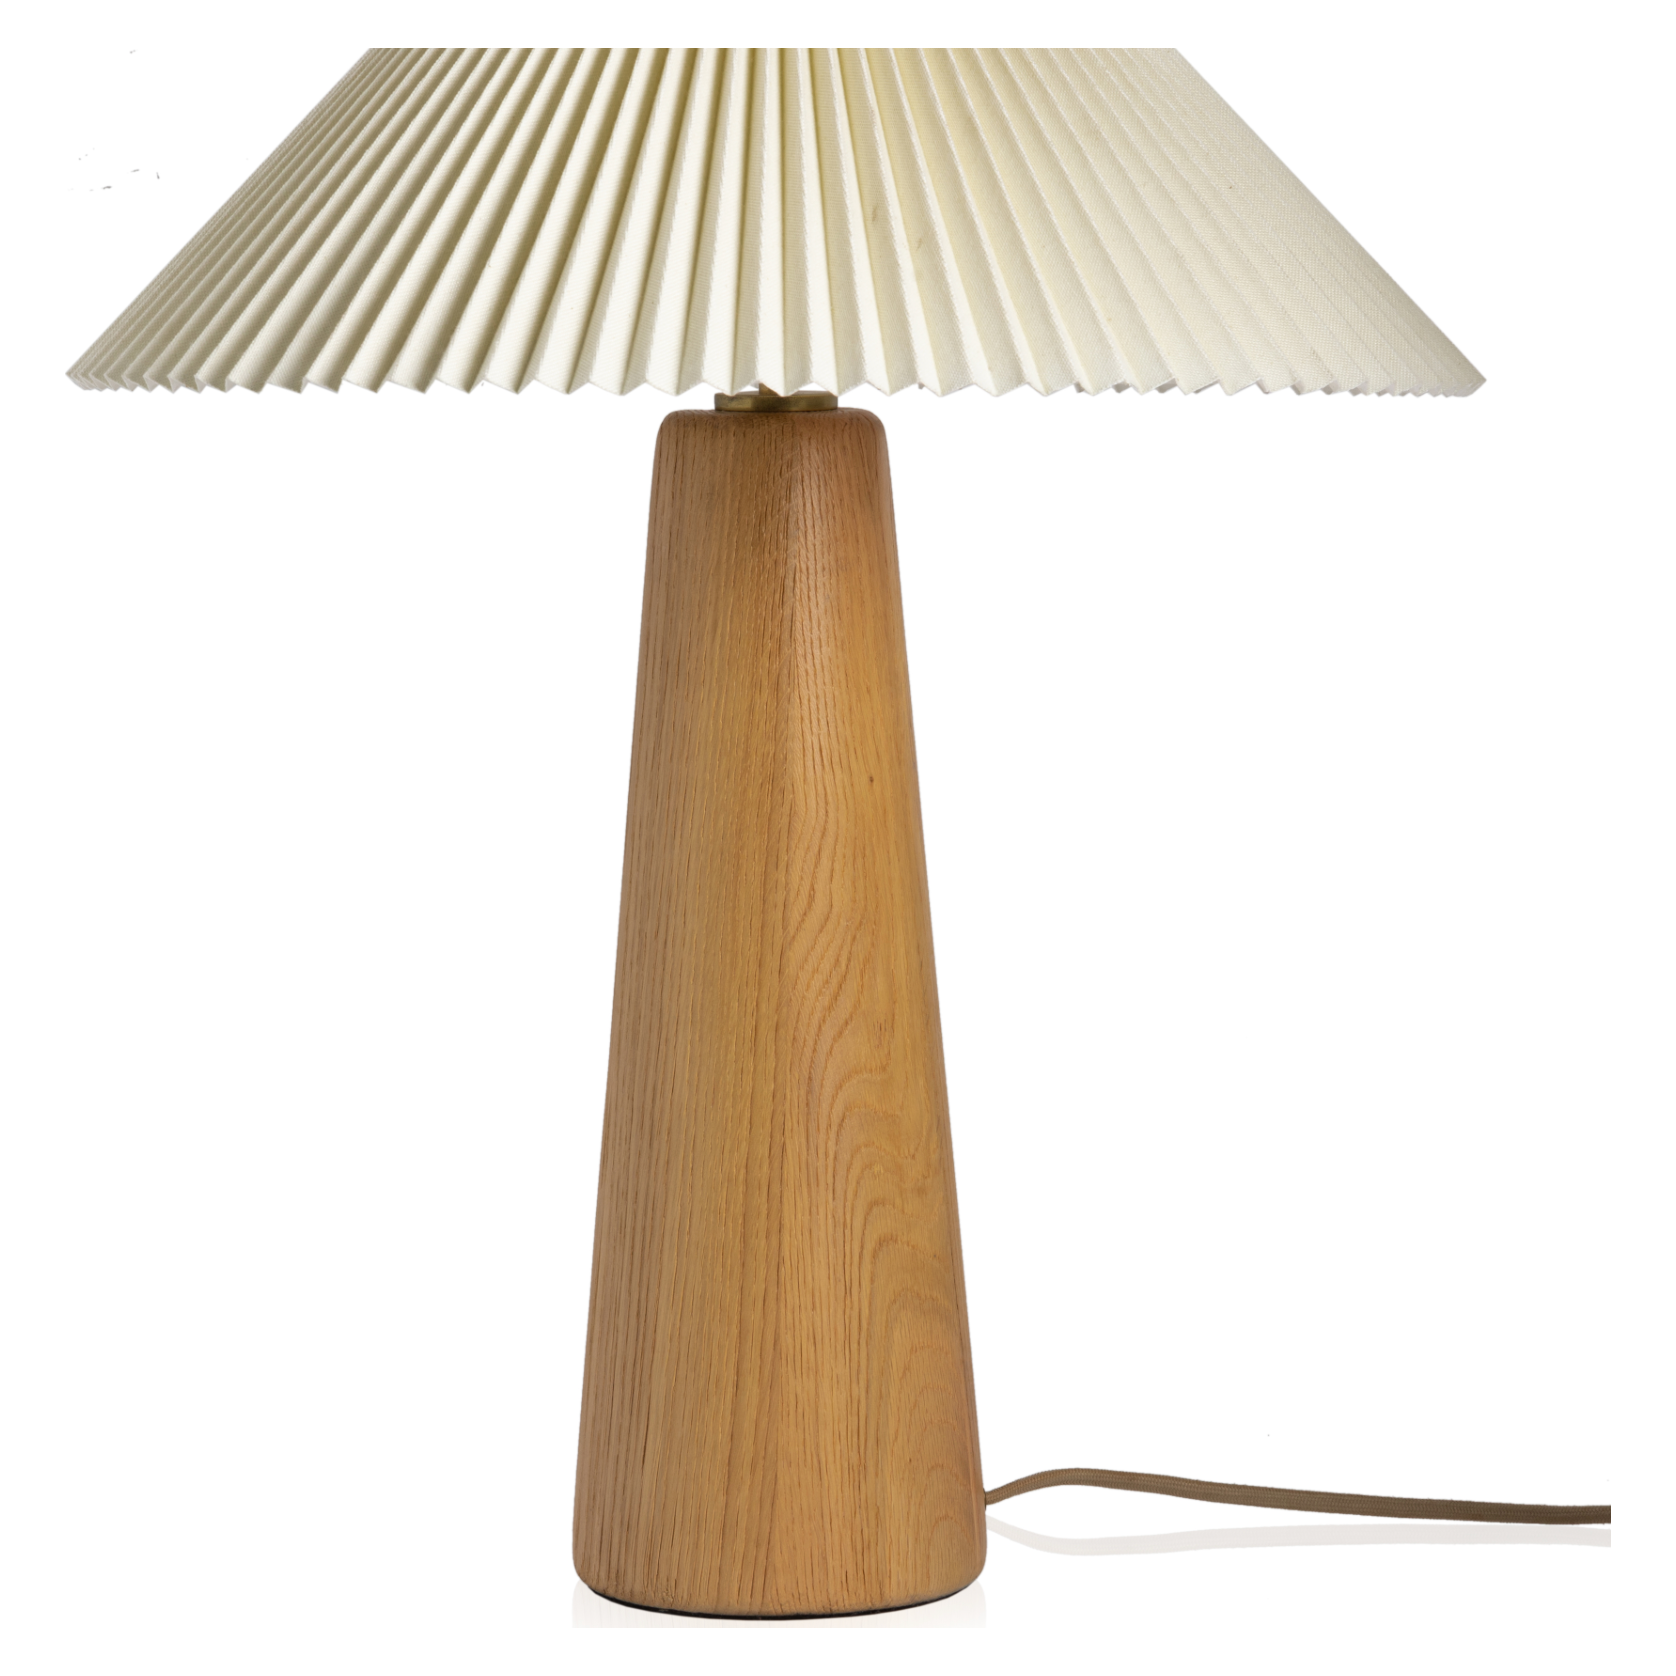 Modern minimal meets traditional. A tapered wood table lamp base is topped with a design-forward pleated shade. Amethyst Home provides interior design, new home construction design consulting, vintage area rugs, and lighting in the Denver metro area.